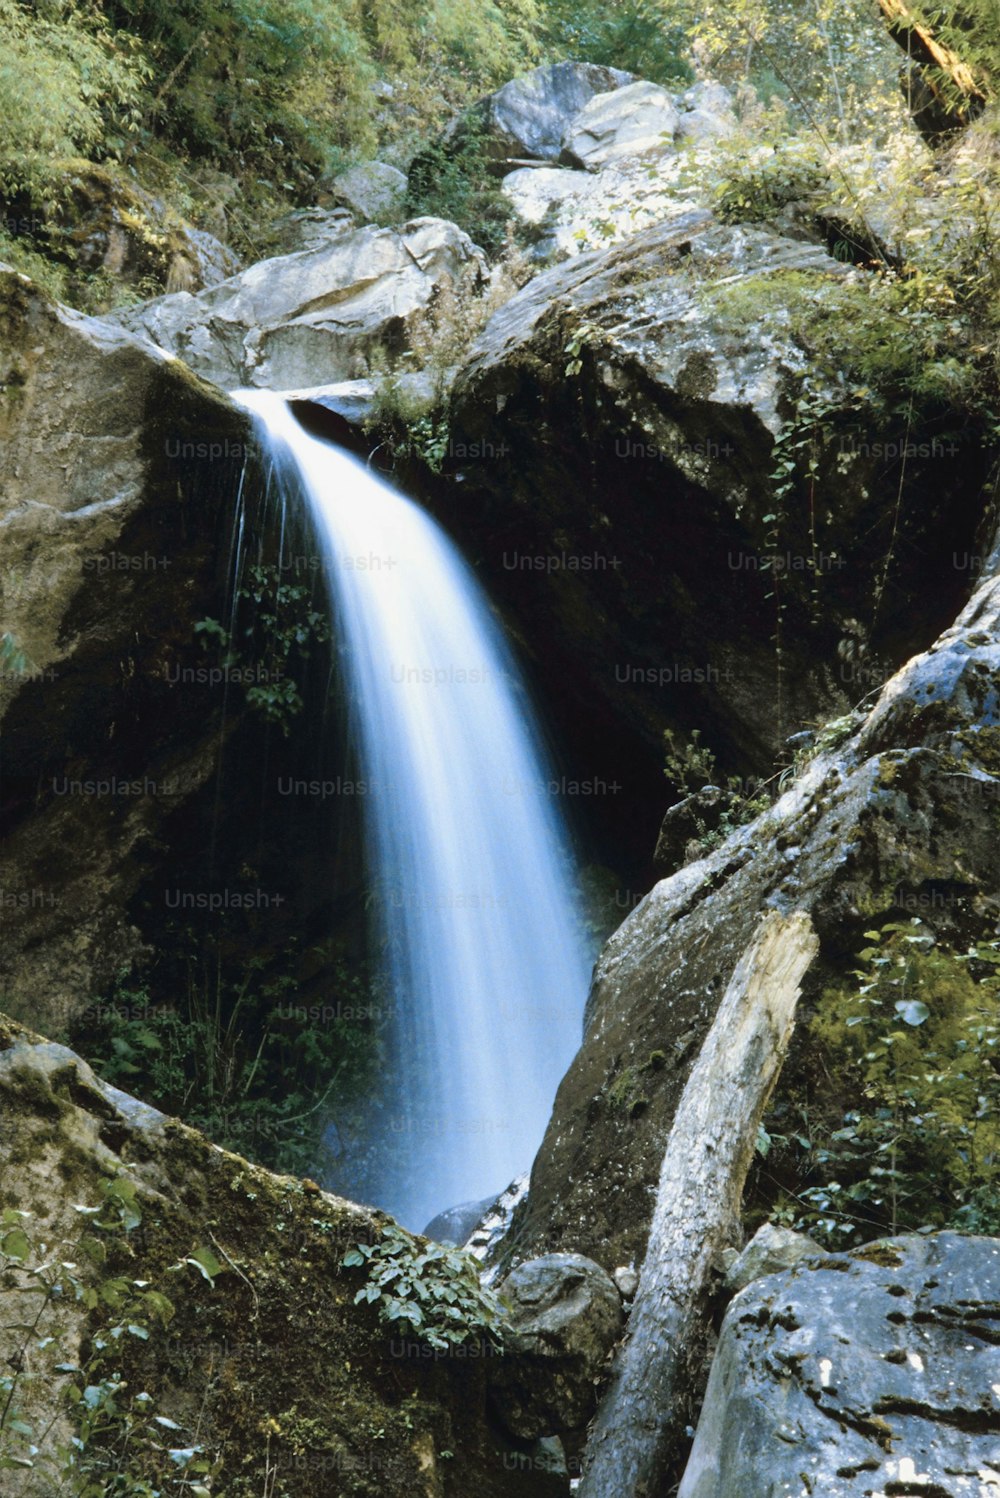 a small waterfall in the middle of a rocky area